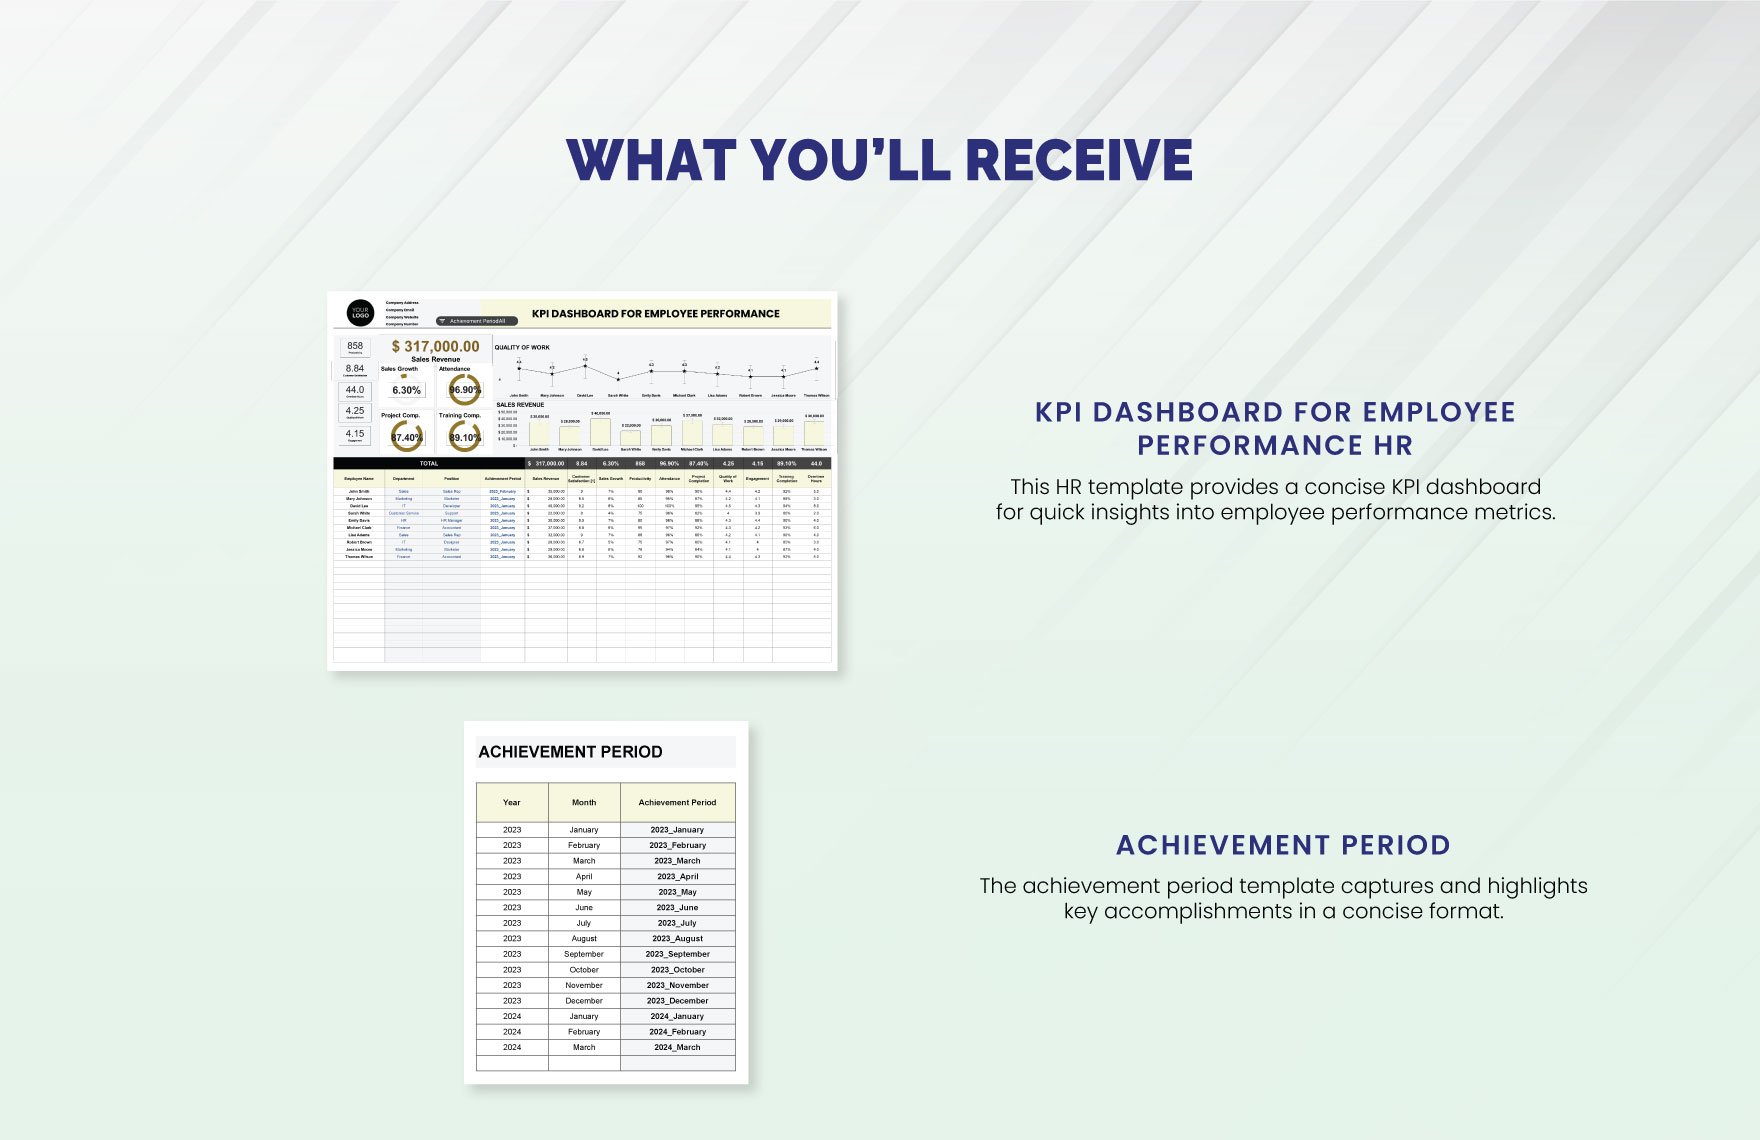 KPI Dashboard for Employee Performance HR Template